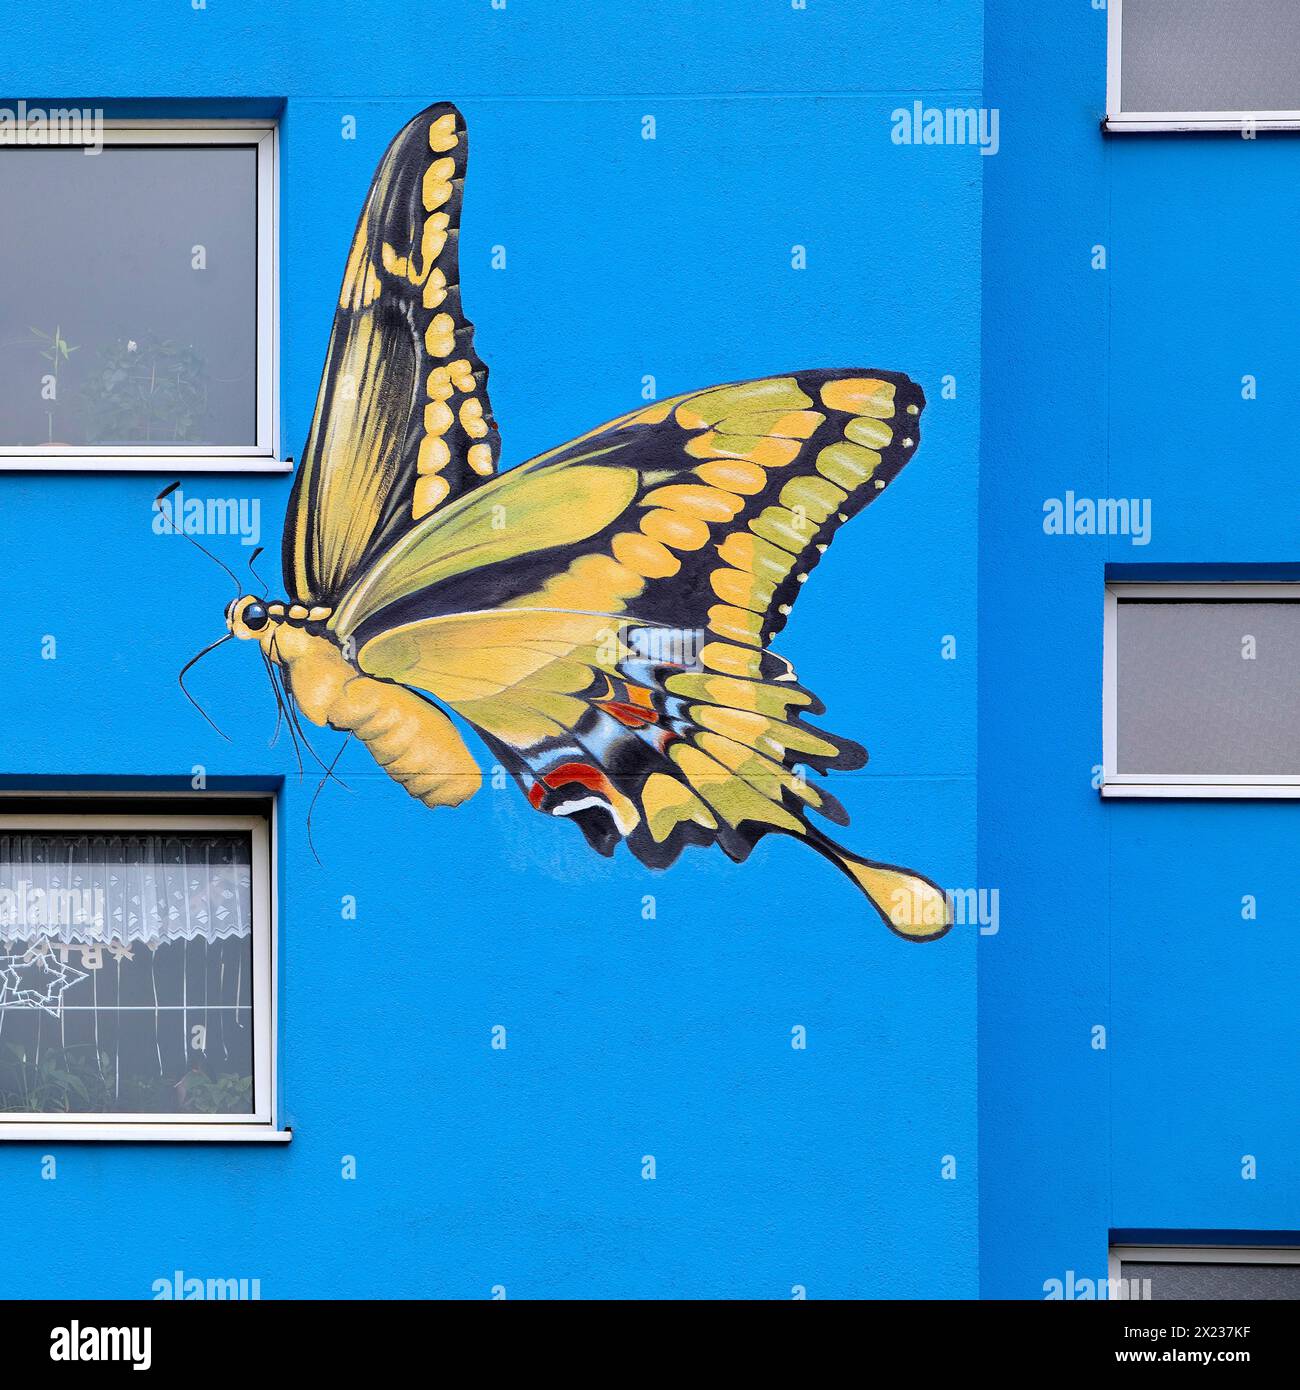 Sunflower house, painted swallowtail butterfly on a skyscraper, artist Ulrich Allgaier, Wuppertal, North Rhine-Westphalia, Germany Stock Photo